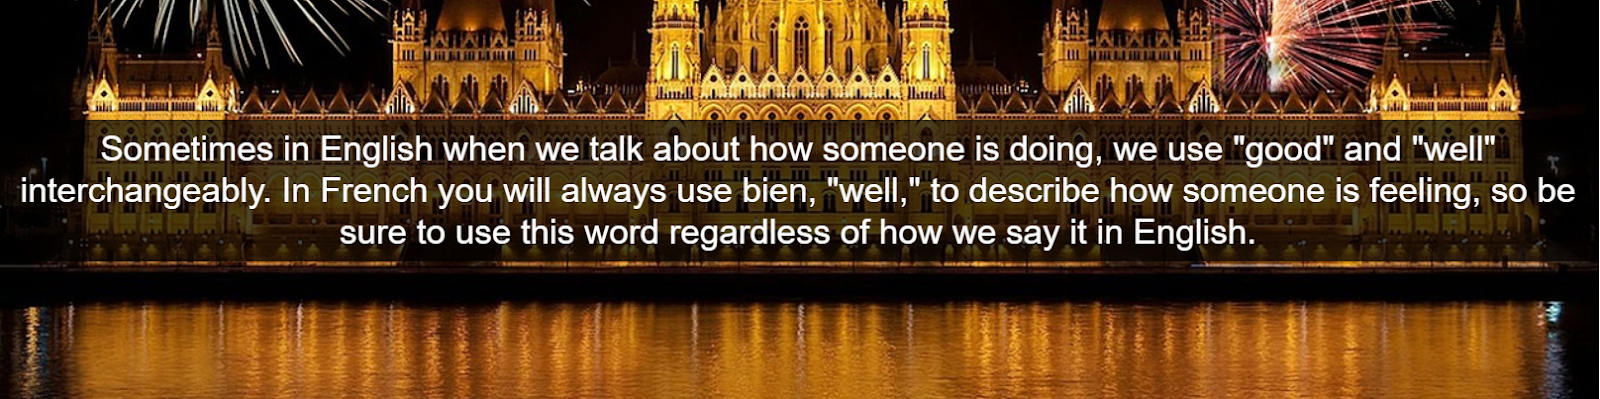 Sometimes in English when we talk about how someone is doing, we use good and well interchangeably.  In French you will always use bien, well, to describe how someone is feeling, so be sure to use this word regardless of how we say it in English.